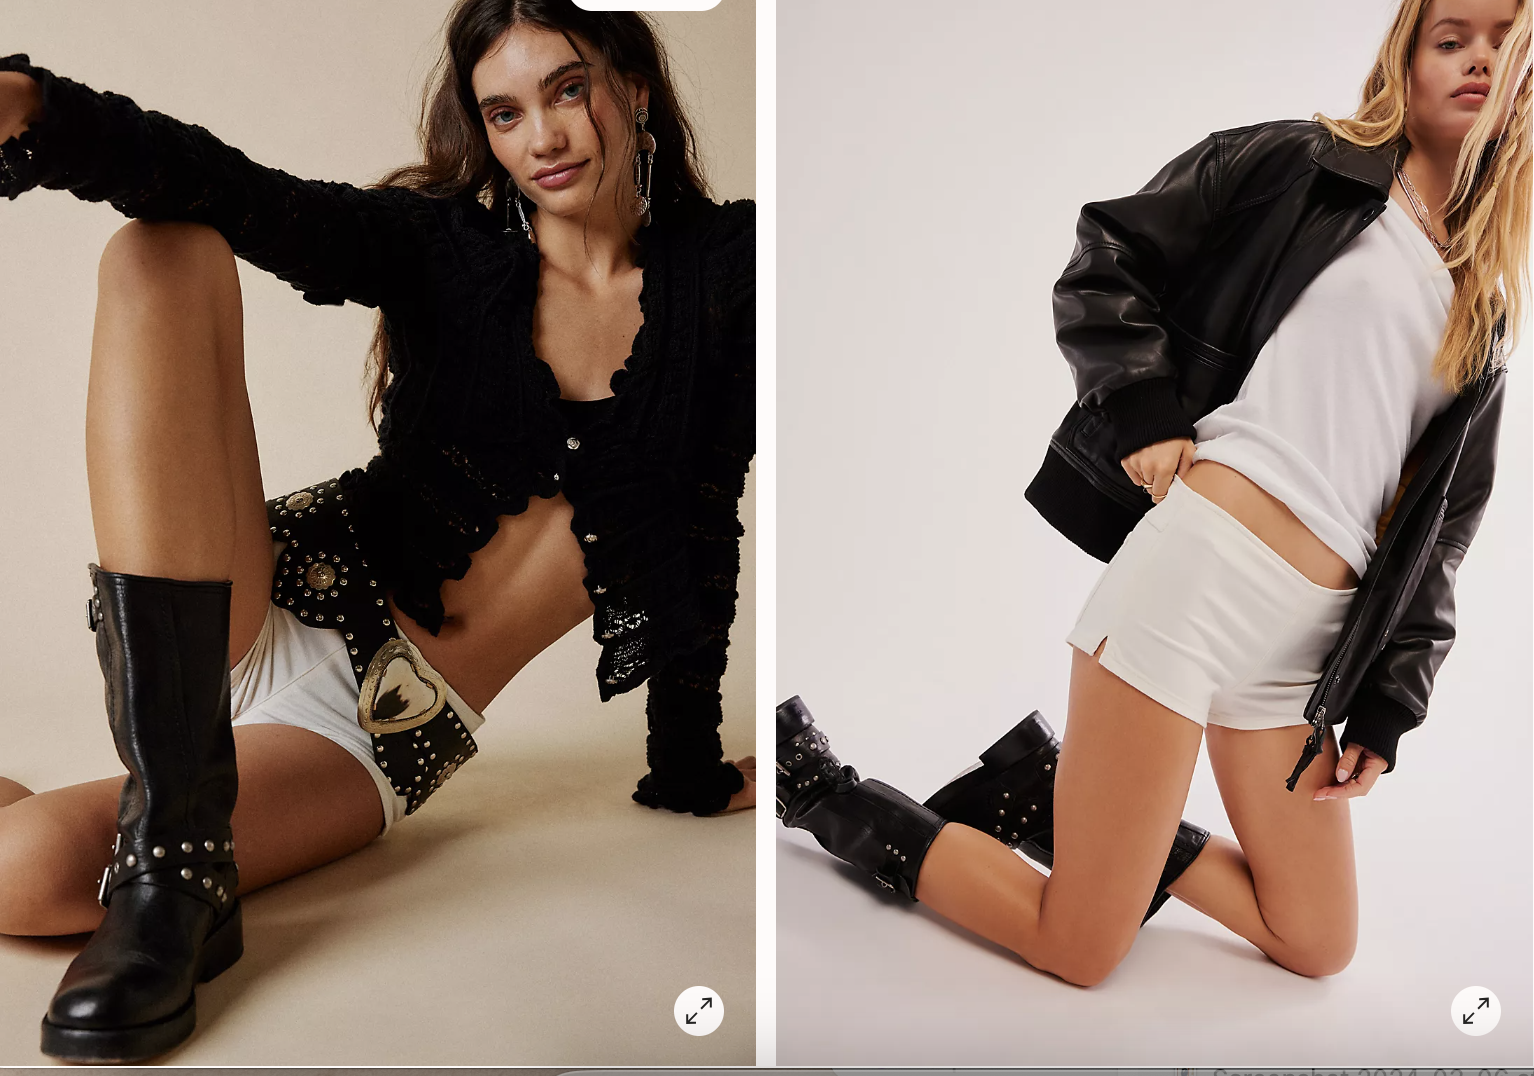 Two poses of a model in a lacy black top, boots, and a model in a white tee with a leather jacket